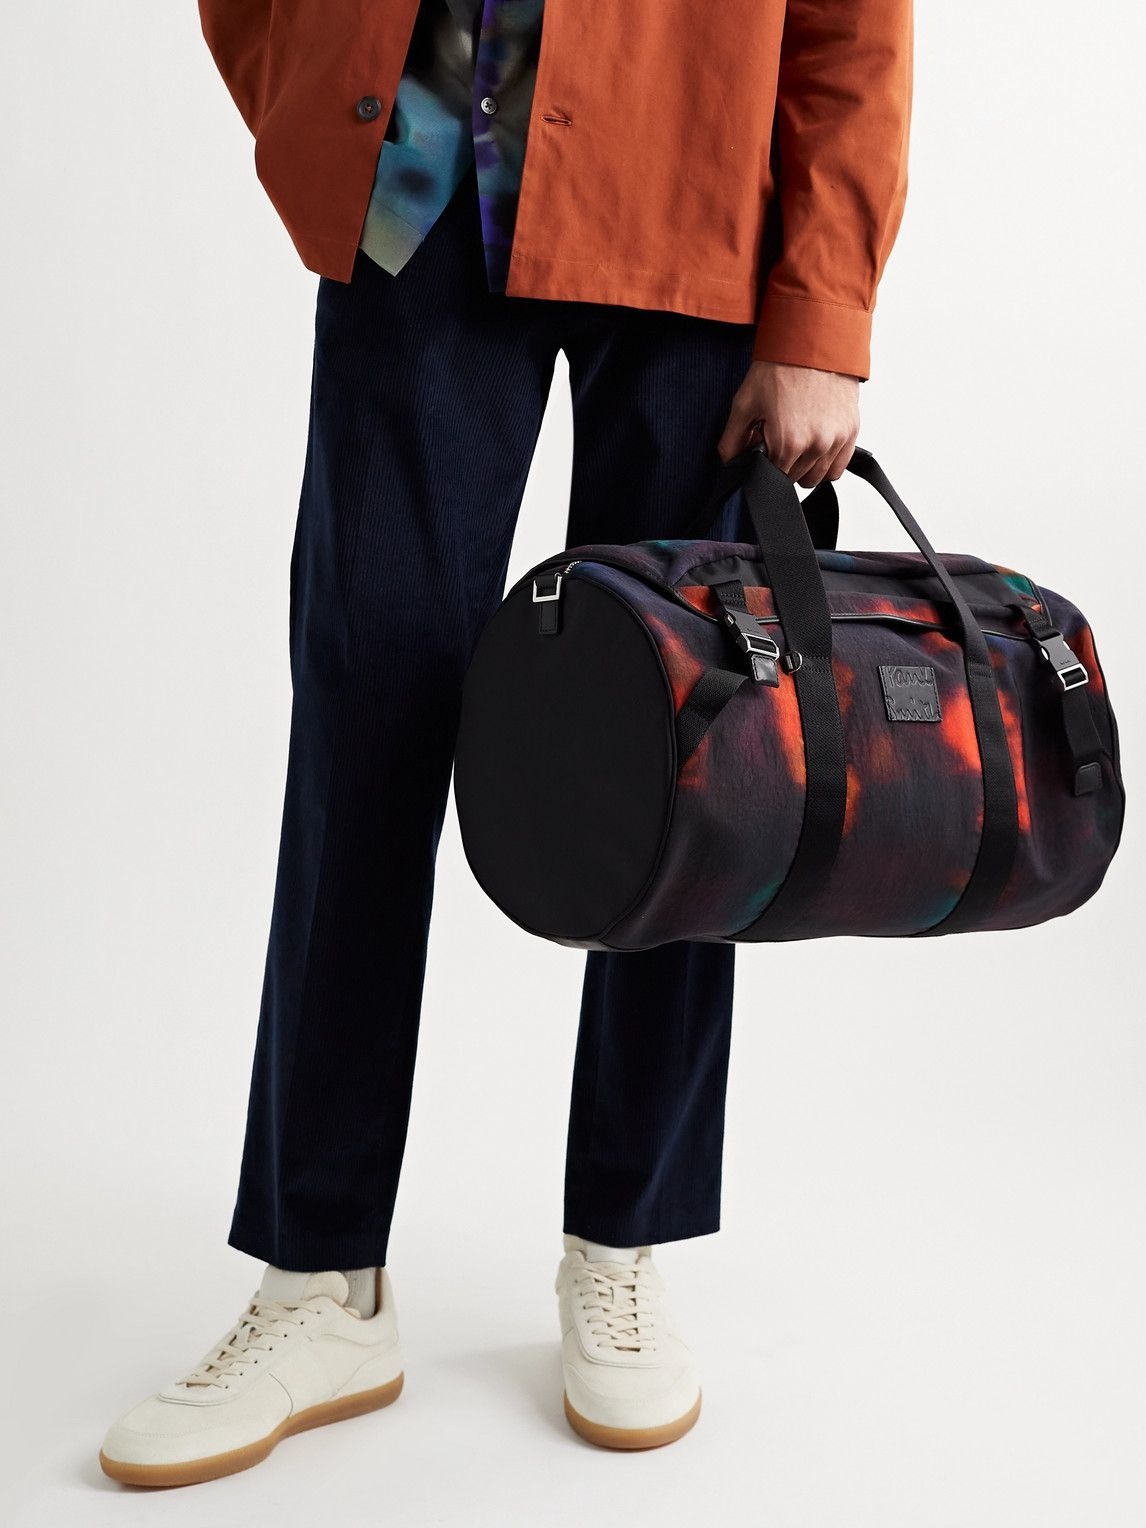 Paul Smith - Leather-Trimmed Printed Nylon-Canvas Duffle Bag Paul Smith